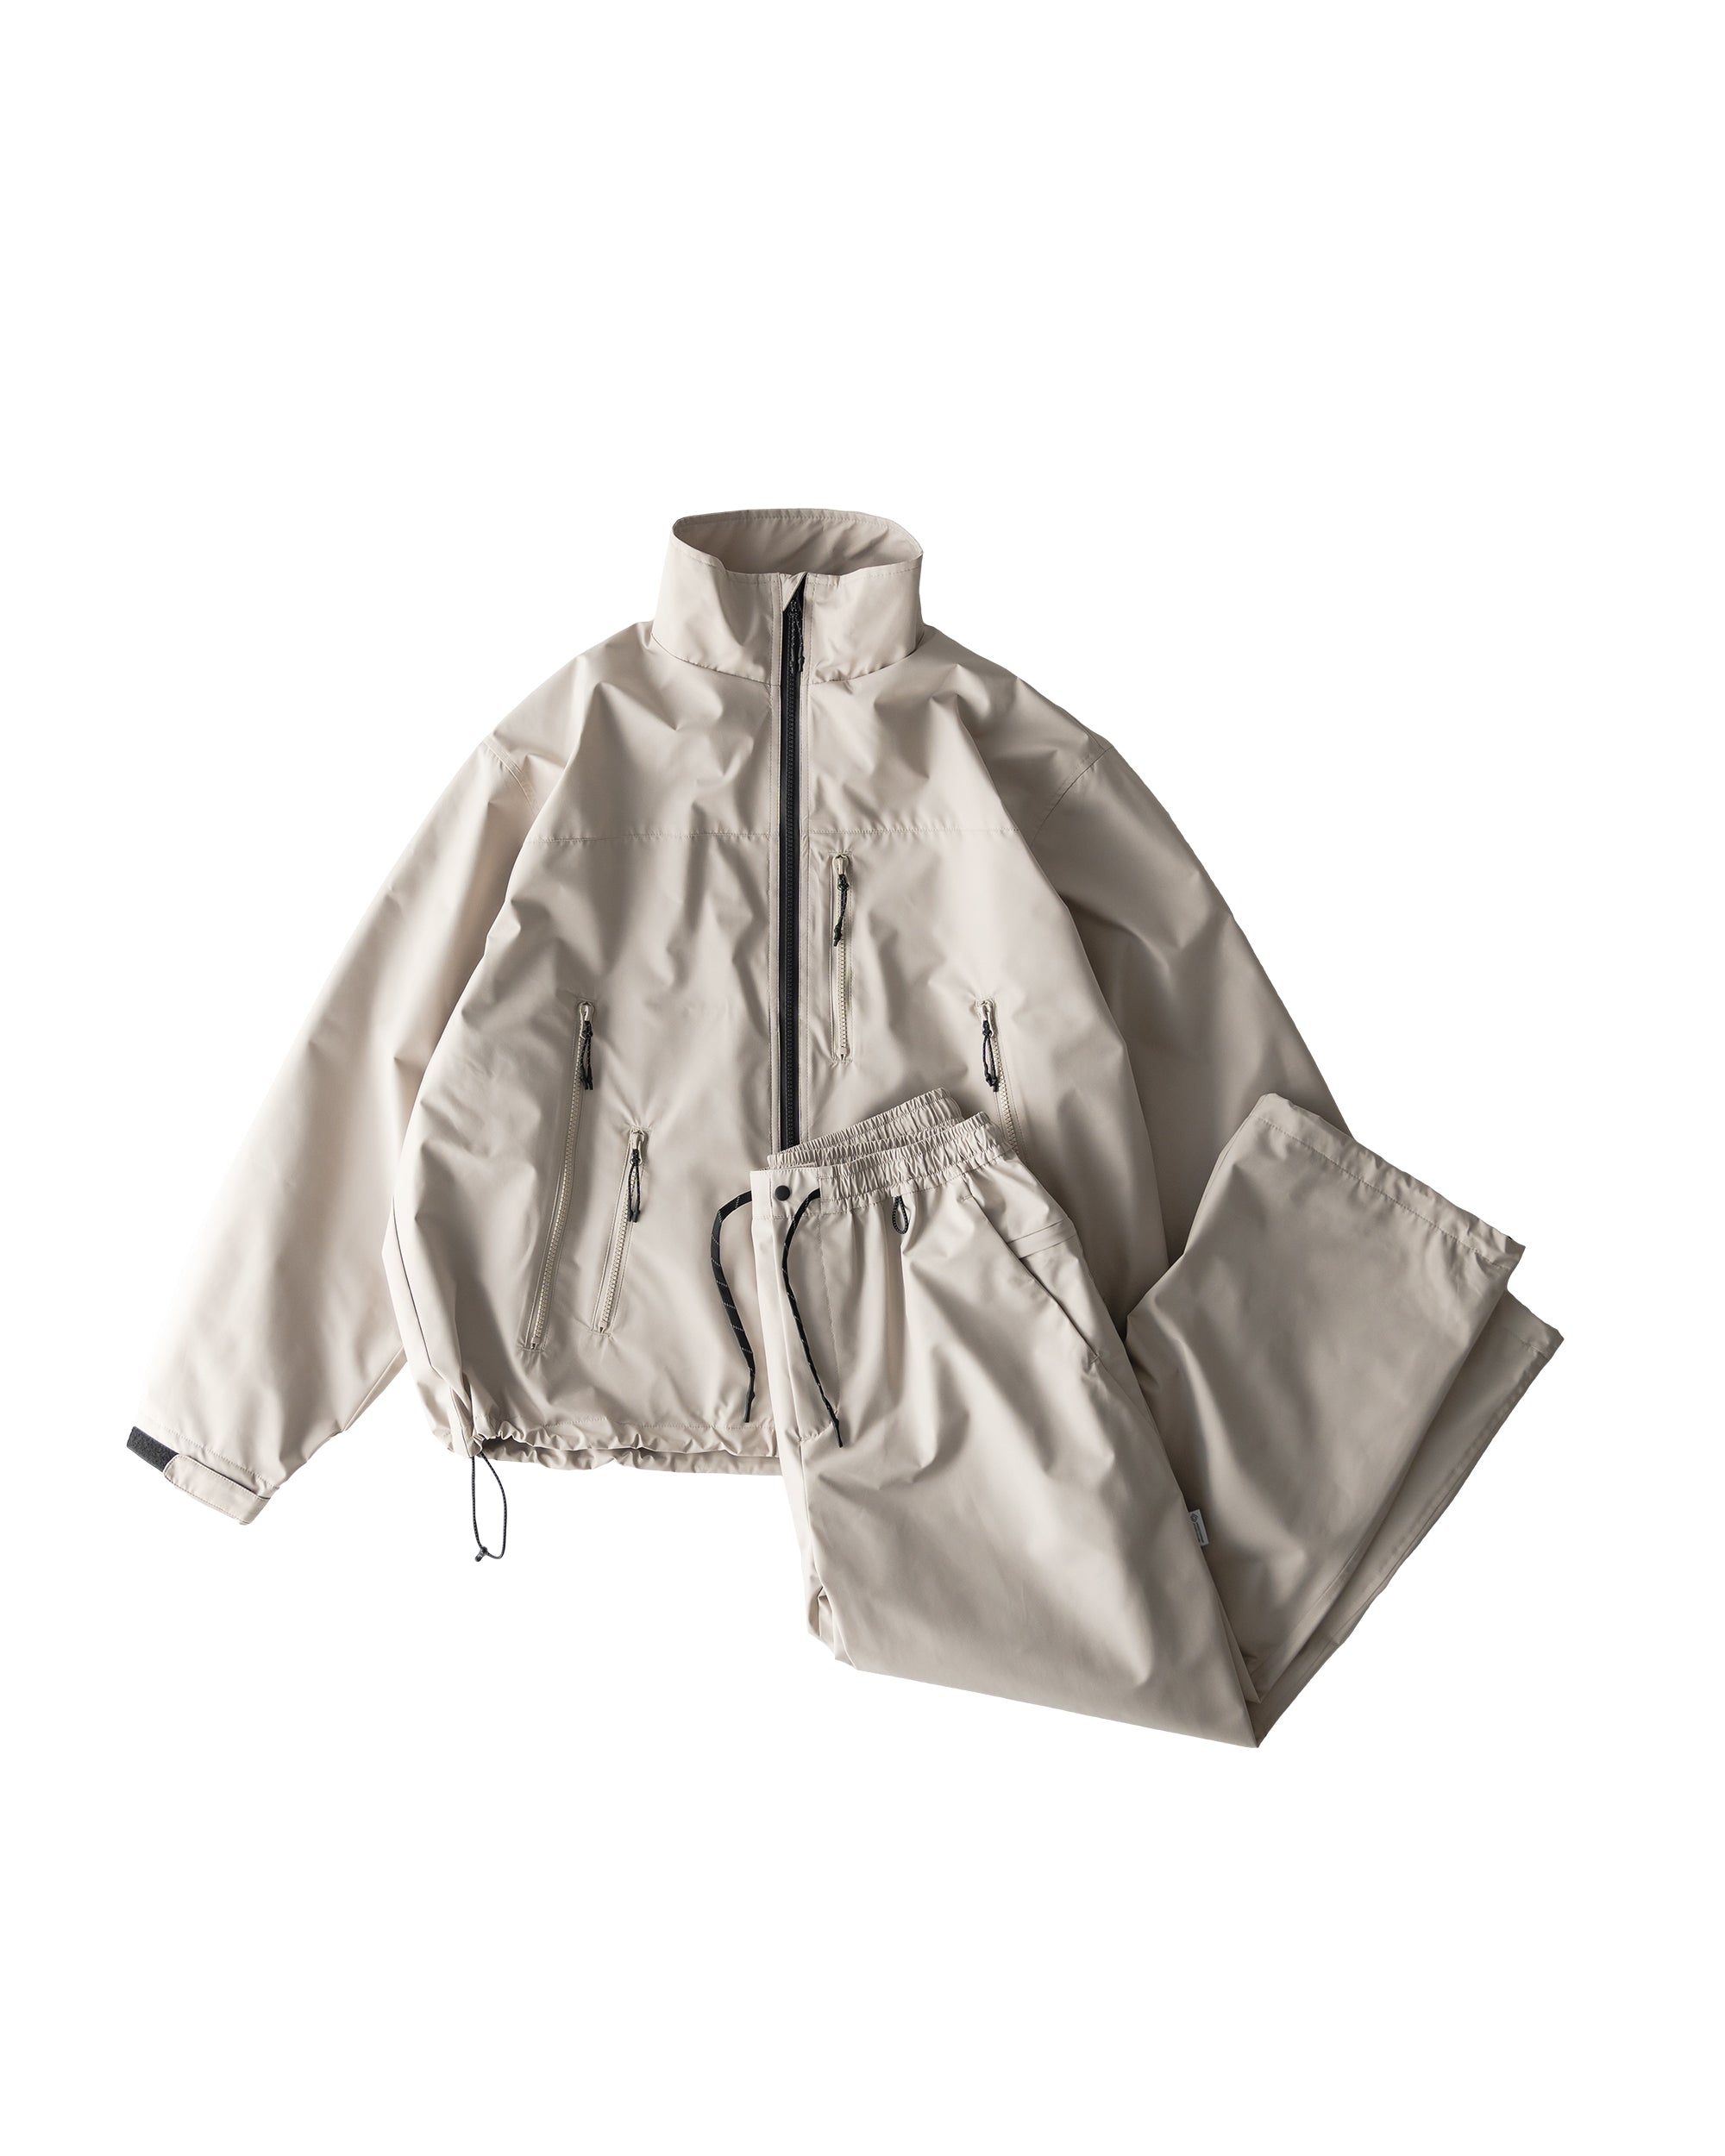 phenix WINDSTOPPER® PRODUCTS BY GORE-TEX LABS